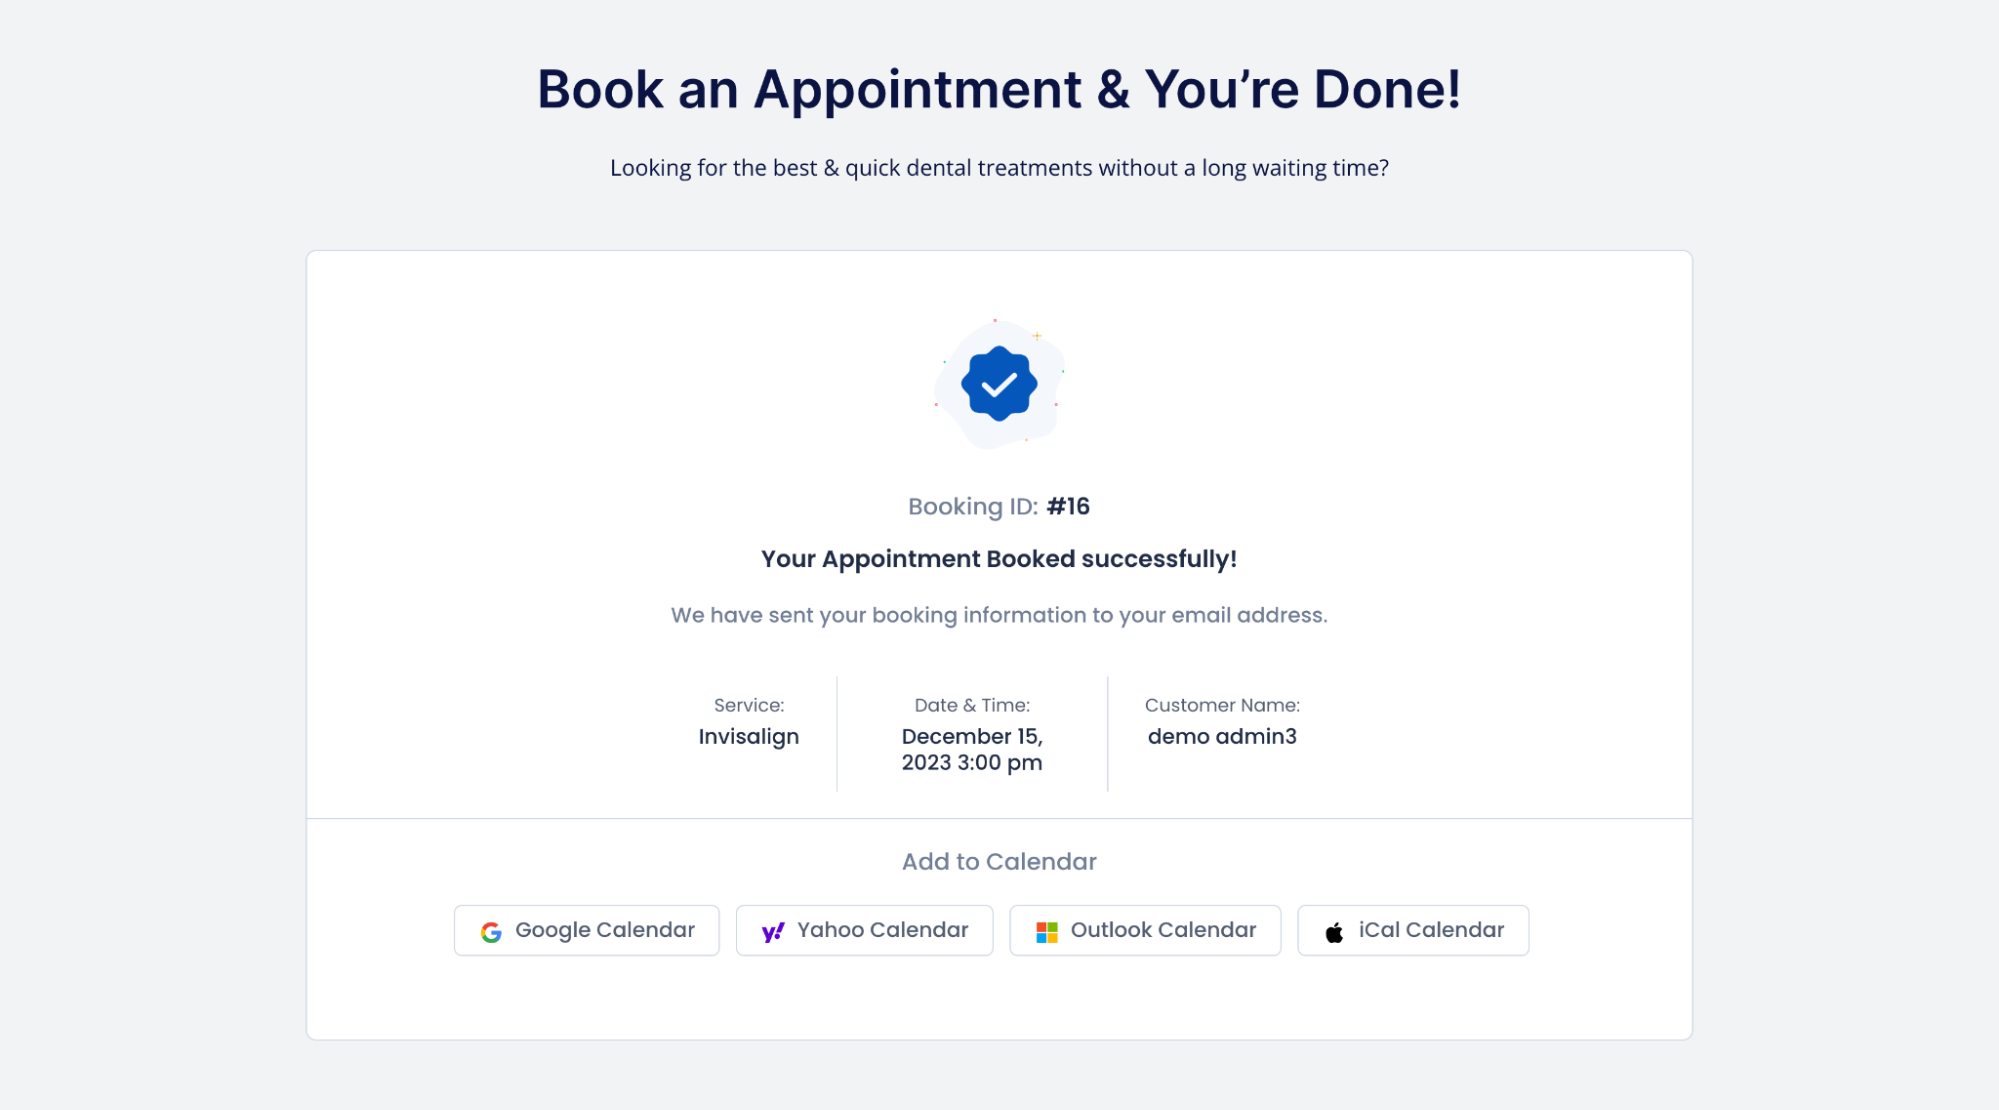 Appointment booked